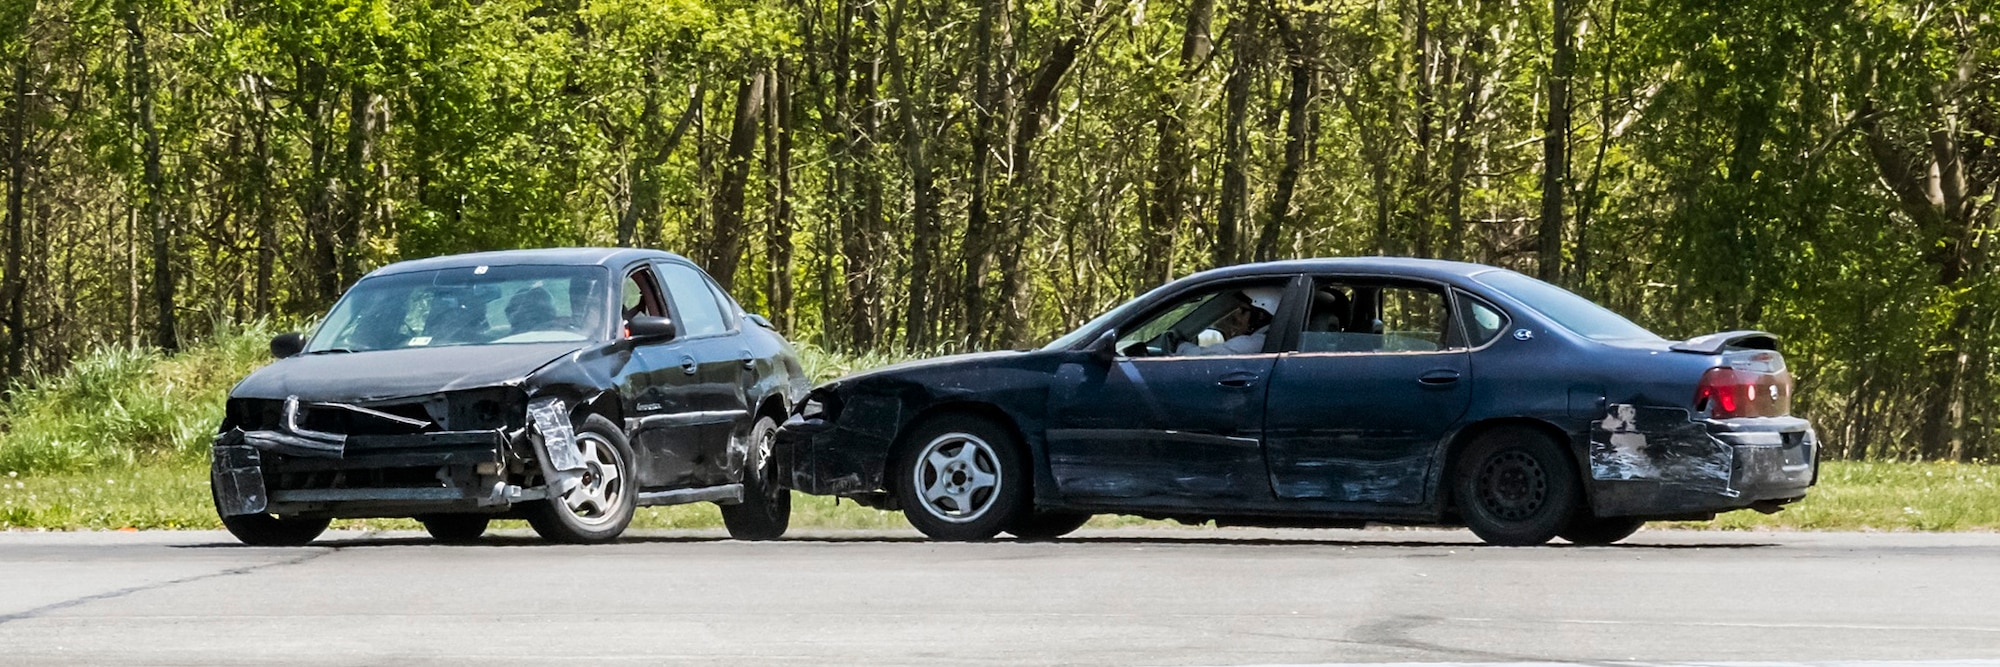 Participants demonstrate pitting technique during the instinctive driving training of the Senior Leader Security Seminar at Montross, Va., May 1, 2018. The unique two-day anti-terrorism course ensures the safety and survivability of  Air Force leaders traveling in medium to critical threat areas. (U.S. Air Force photo by Michael Hastings)